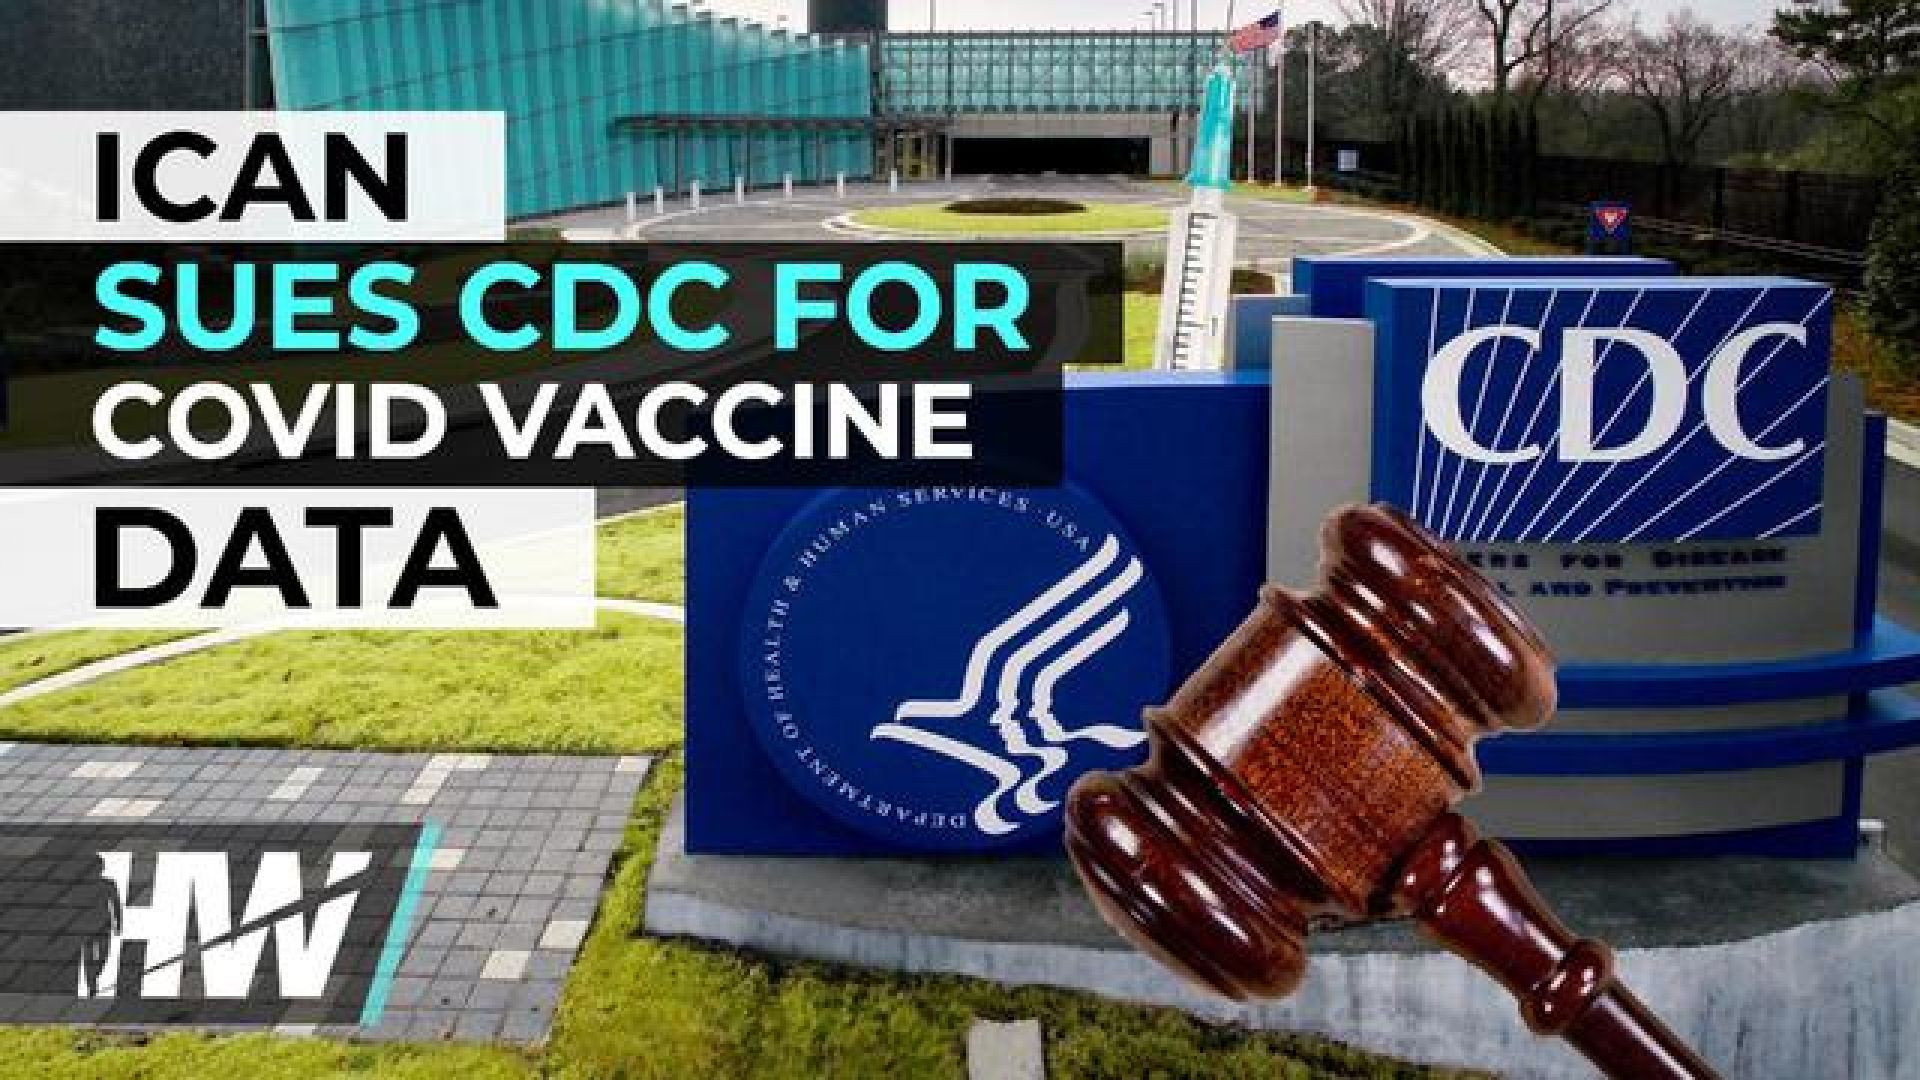 ICAN SUES CDC FOR COVID VACCINE DATA